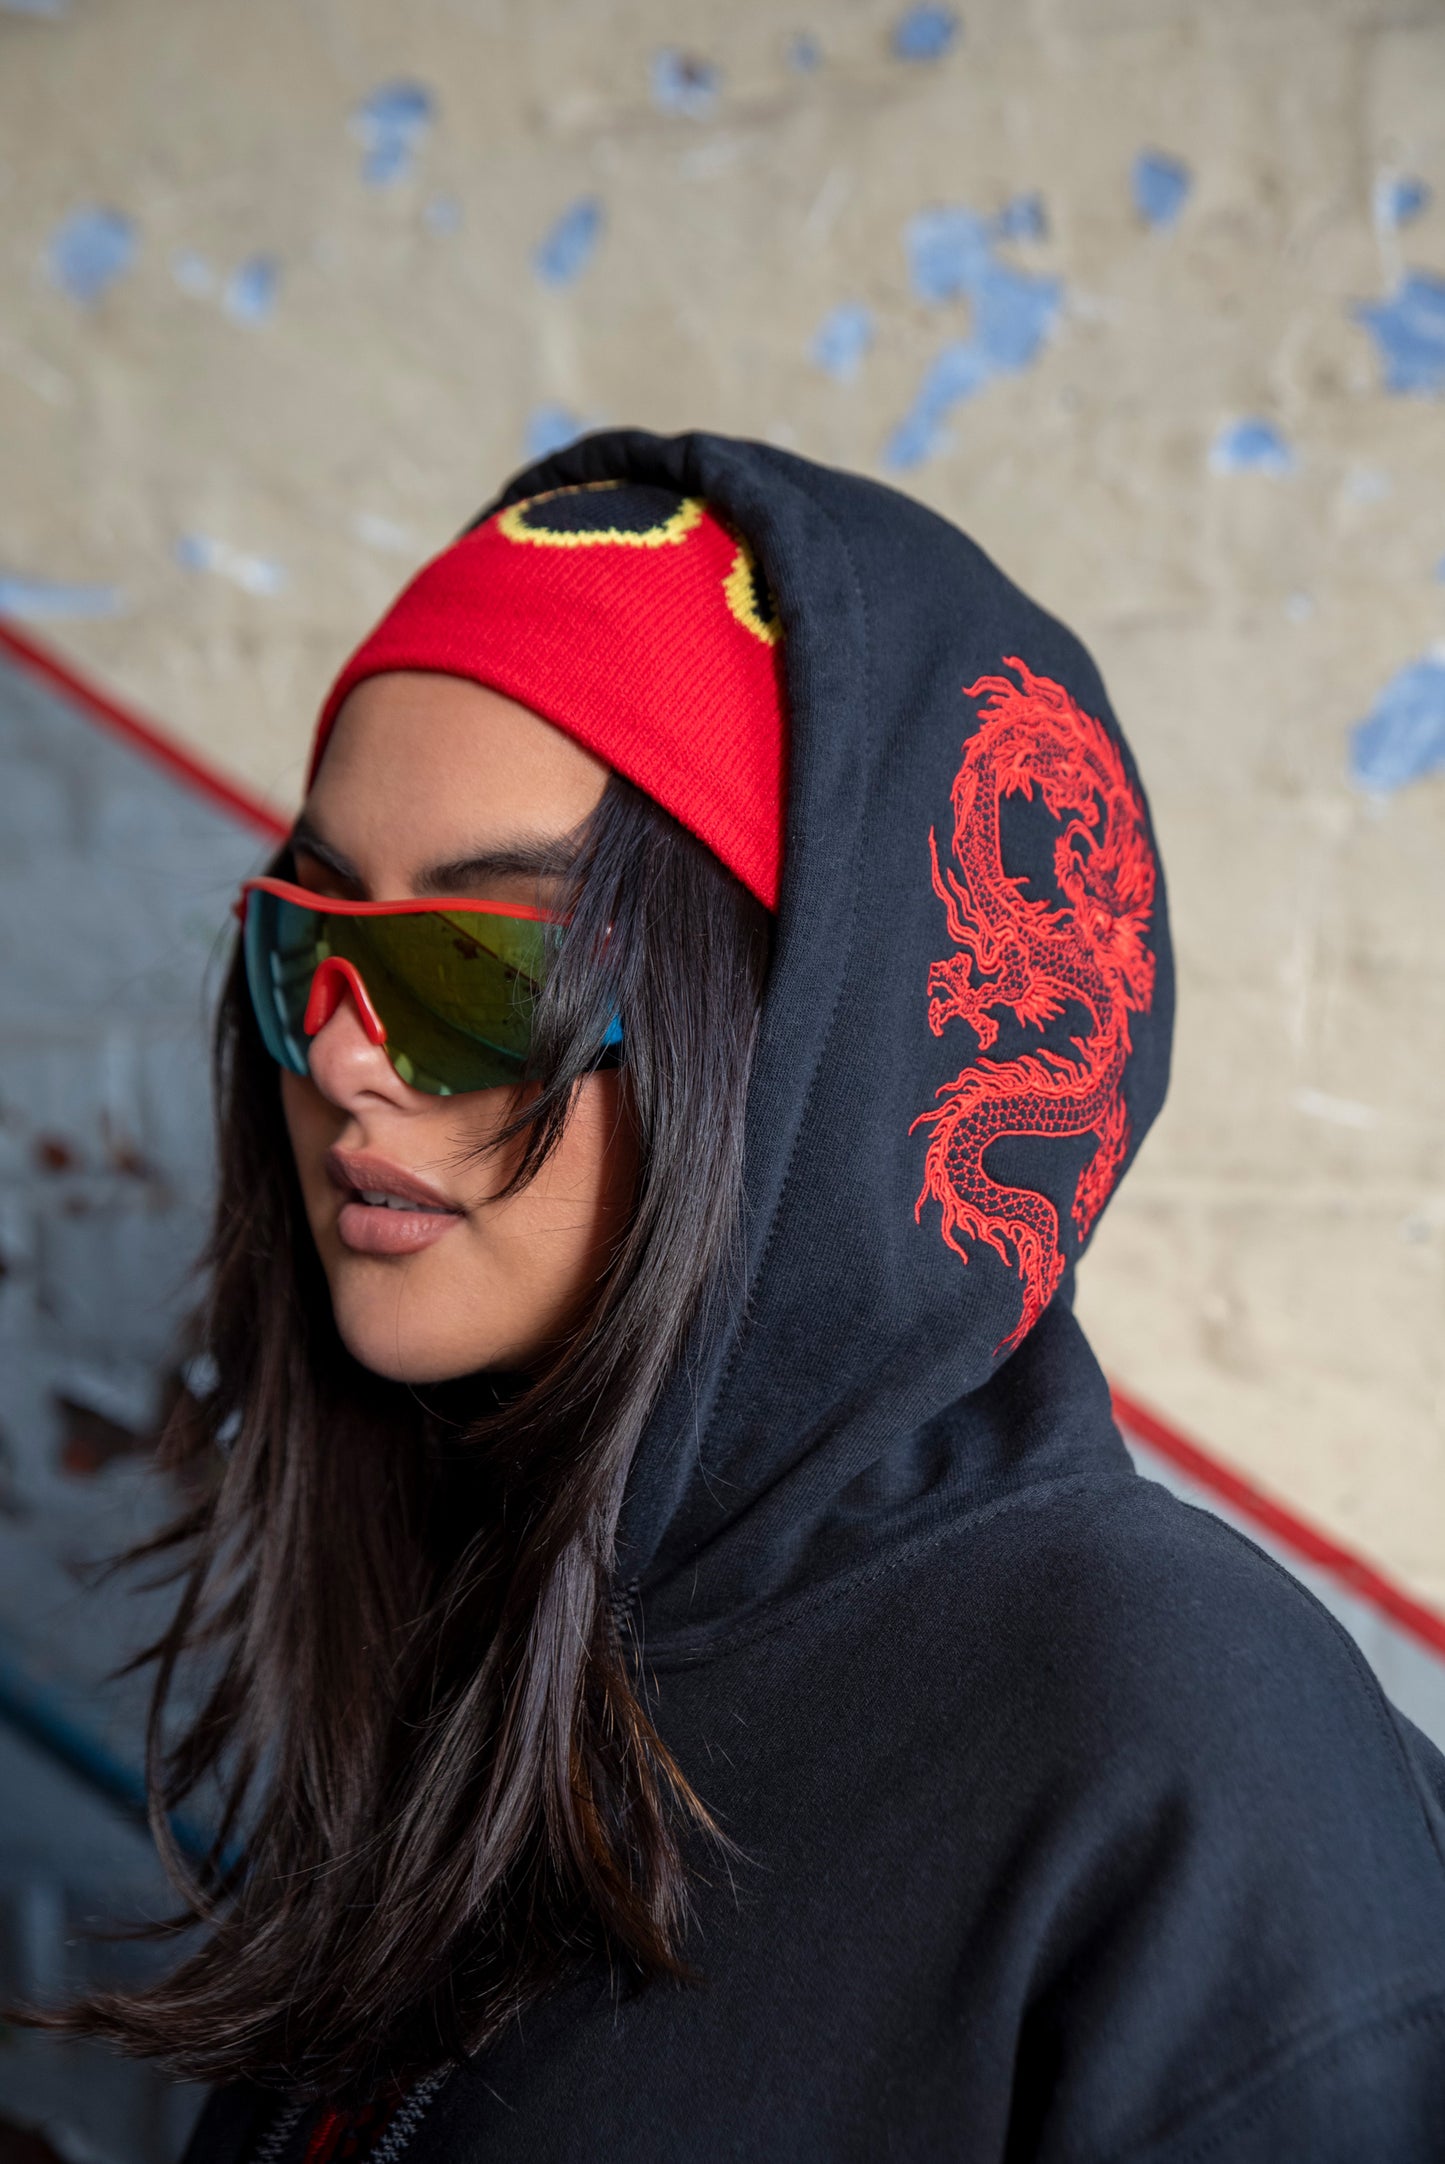 Hoodie in Black with Red Dragon Embroidery